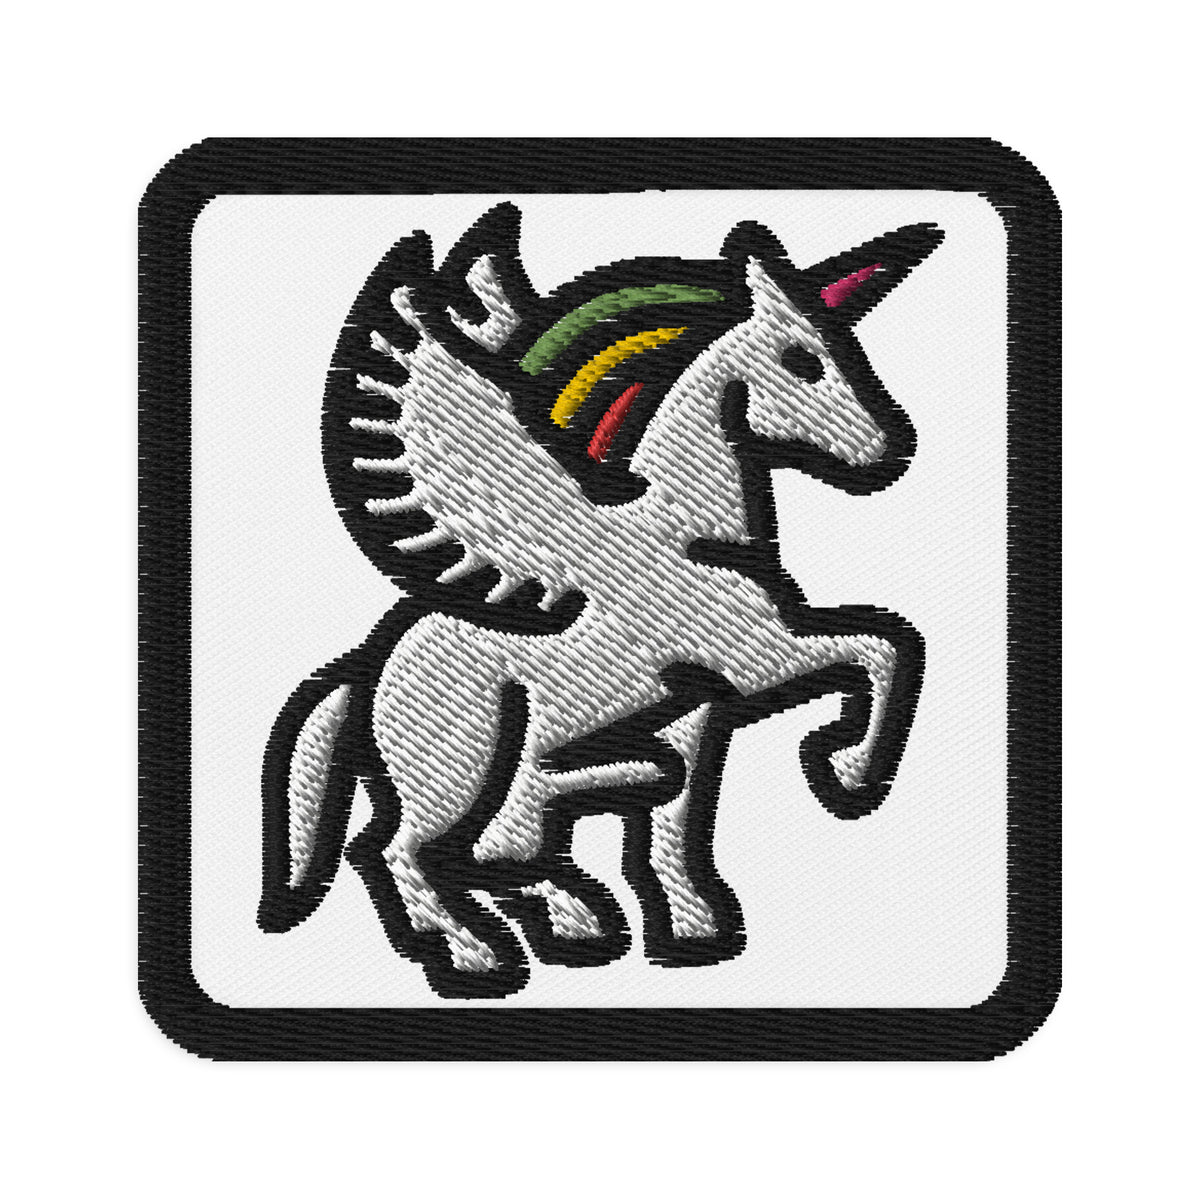 Look at the Horn On That Unicorn Patch